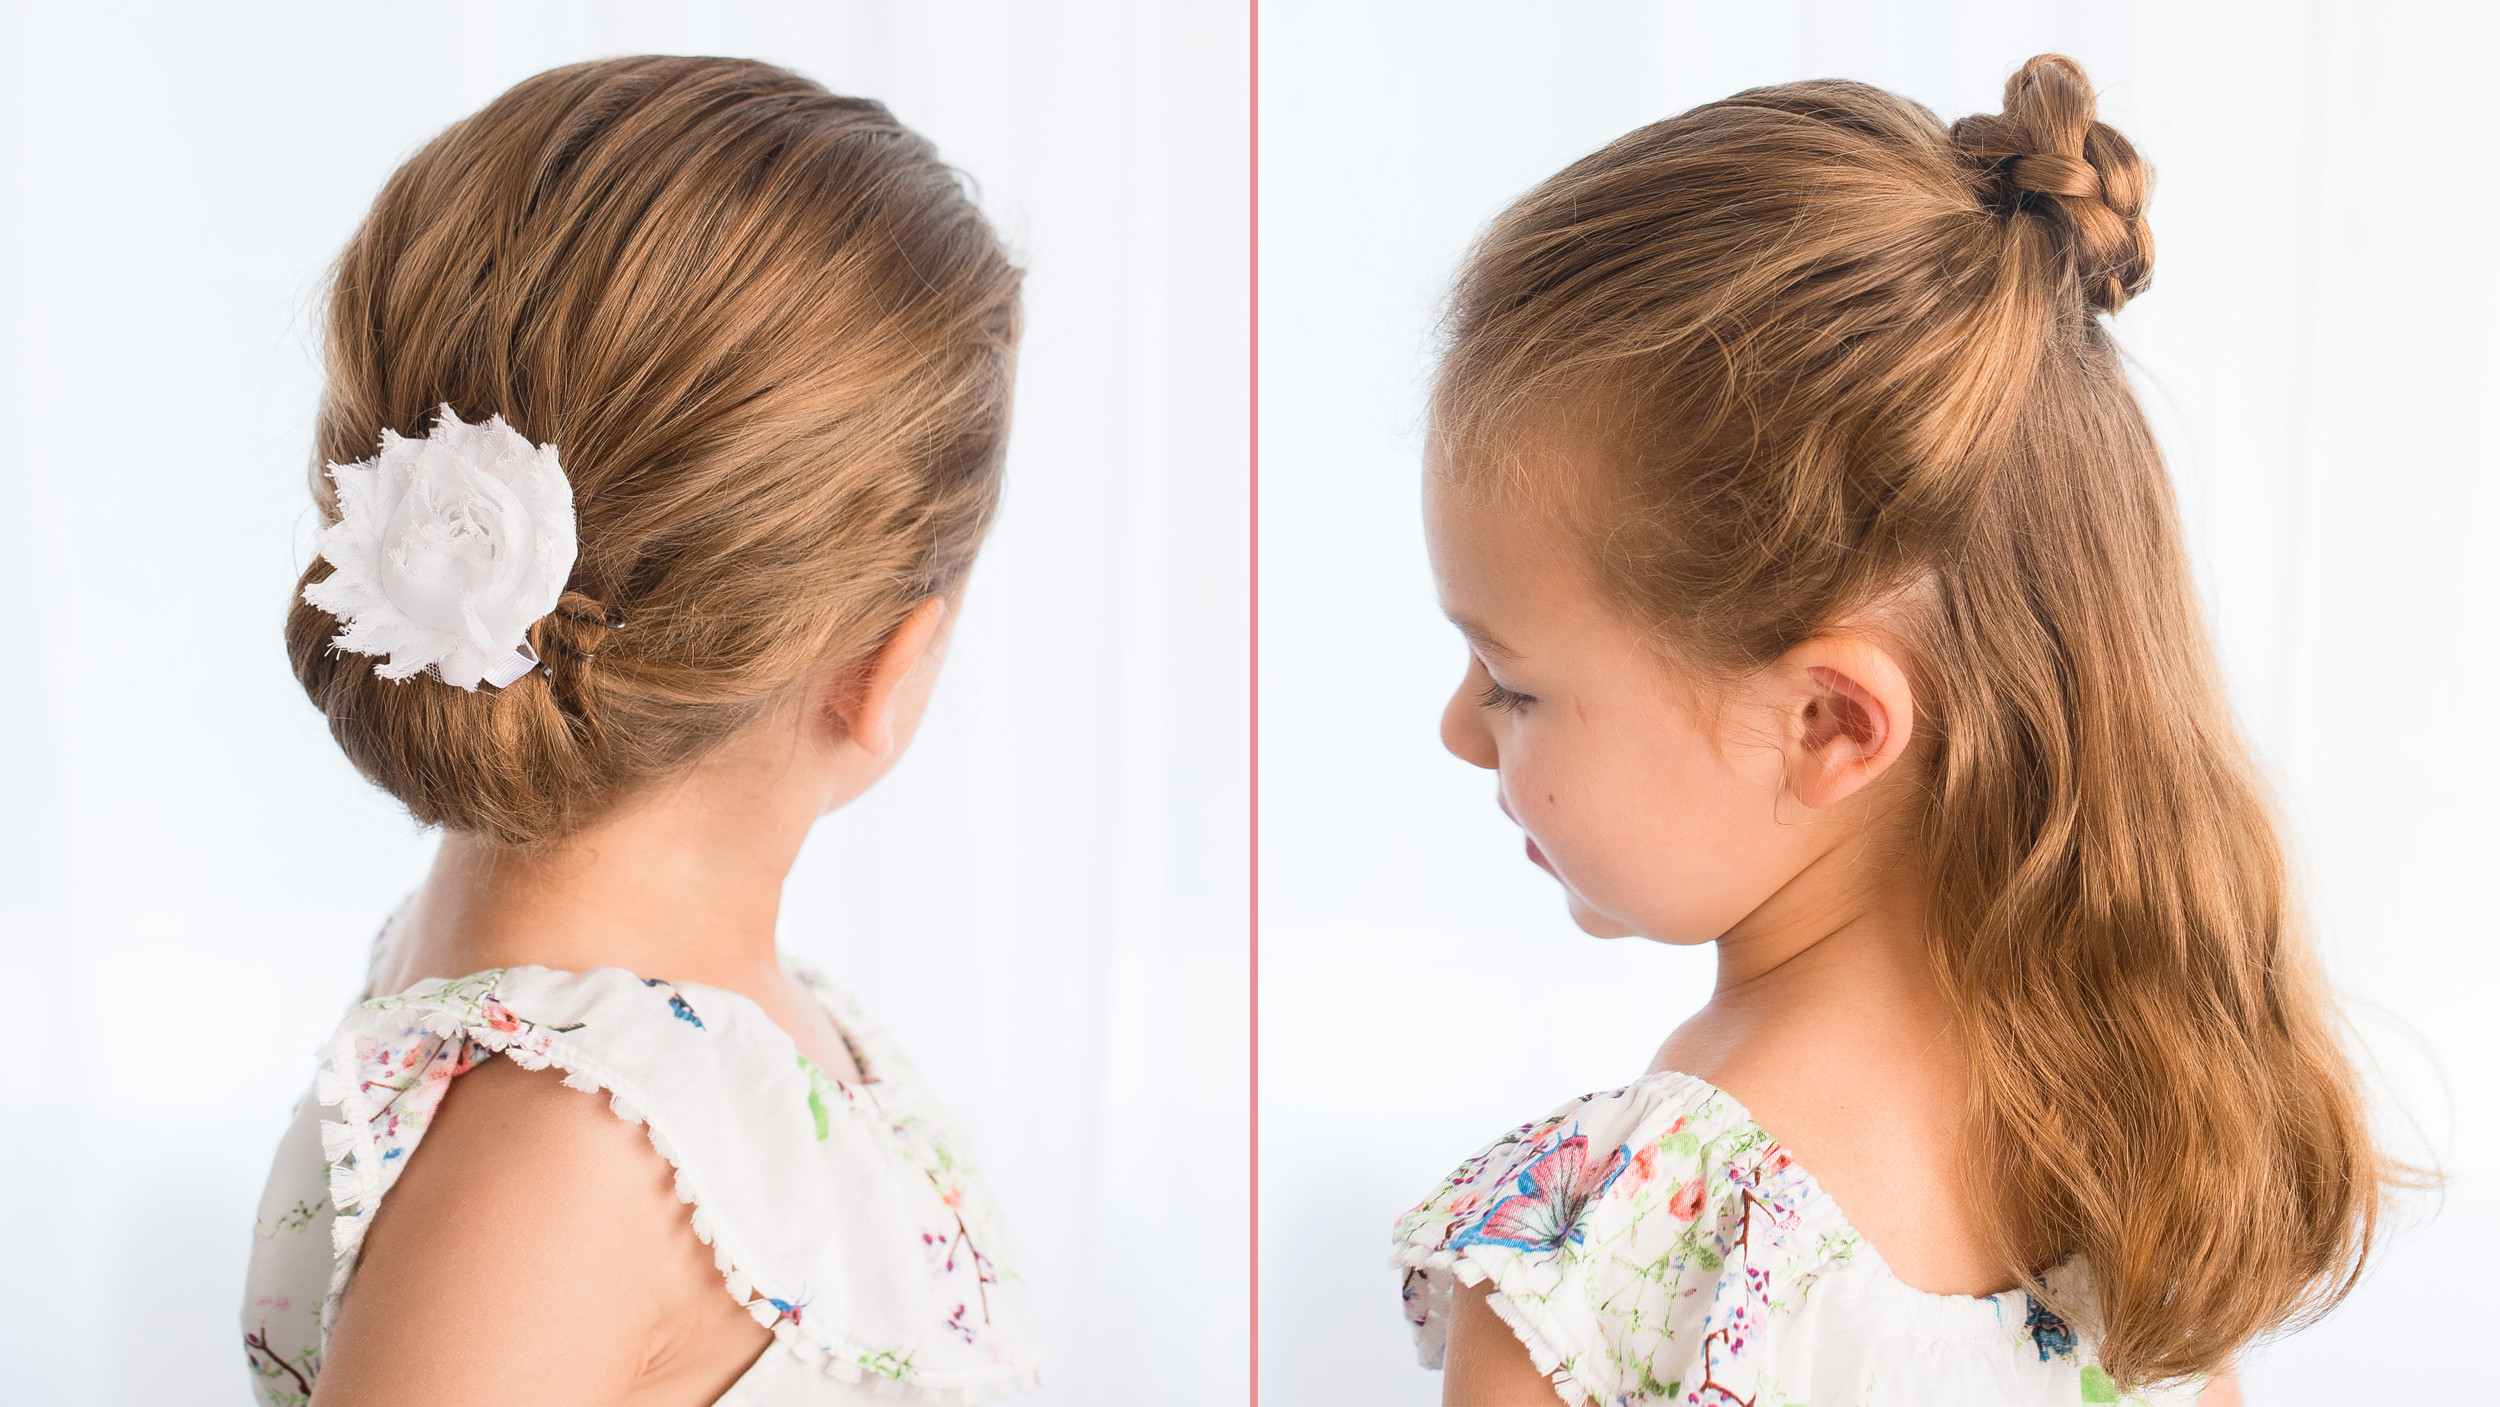 Simple Little Girl Hairstyles
 Easy hairstyles for girls that you can create in minutes